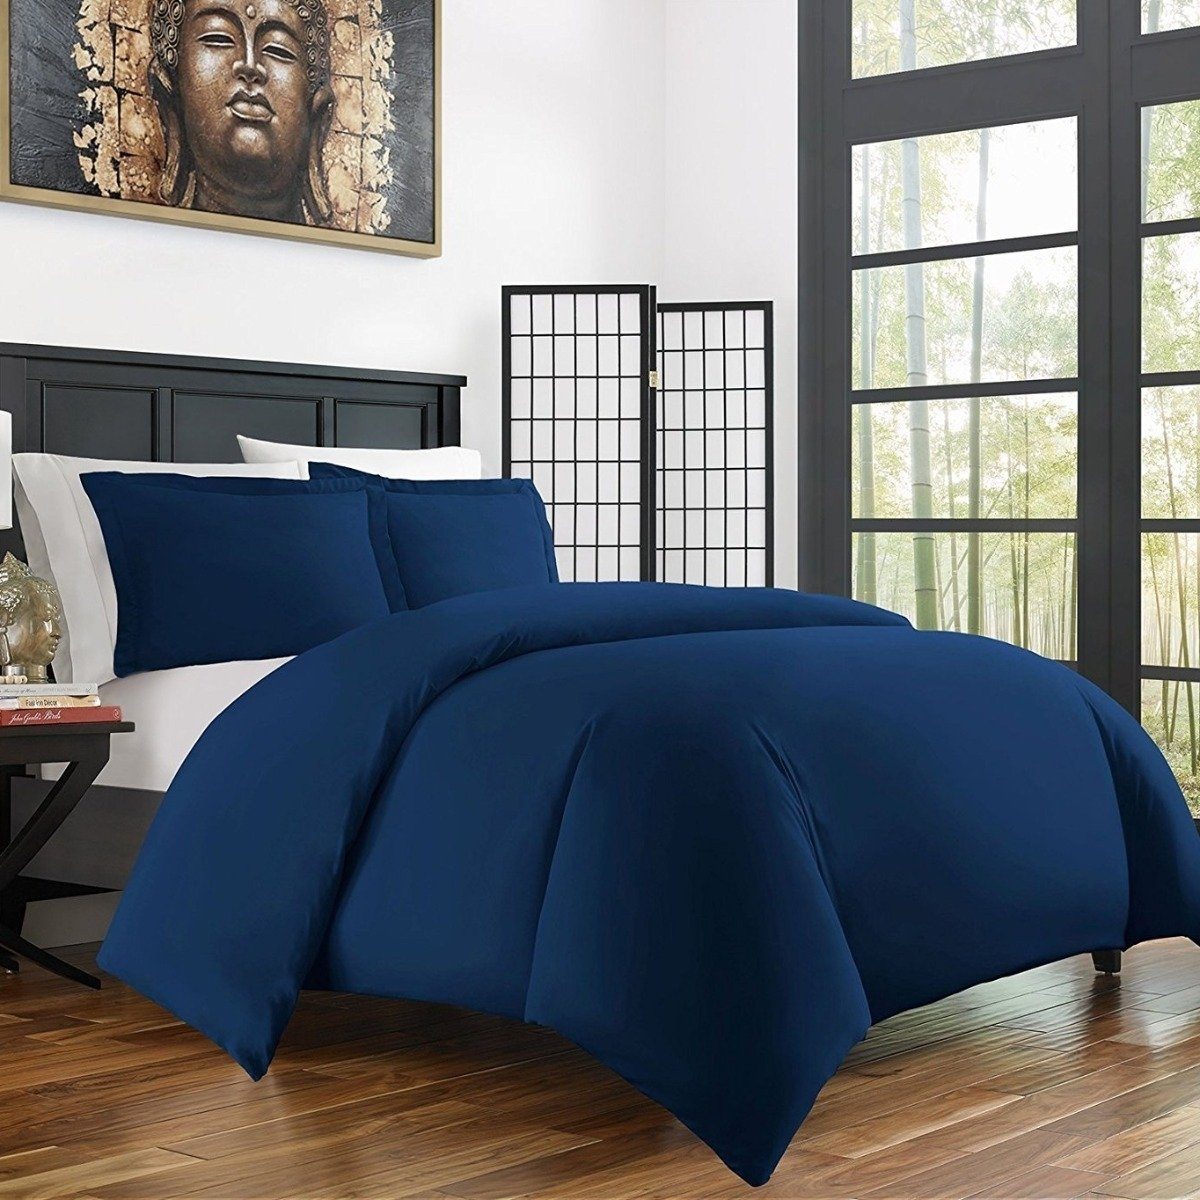 Bamboo Duvet Cover Set - Hypoallergenic - Assorted Sizes and Colors / Navy Blue / Twin/Twin XL